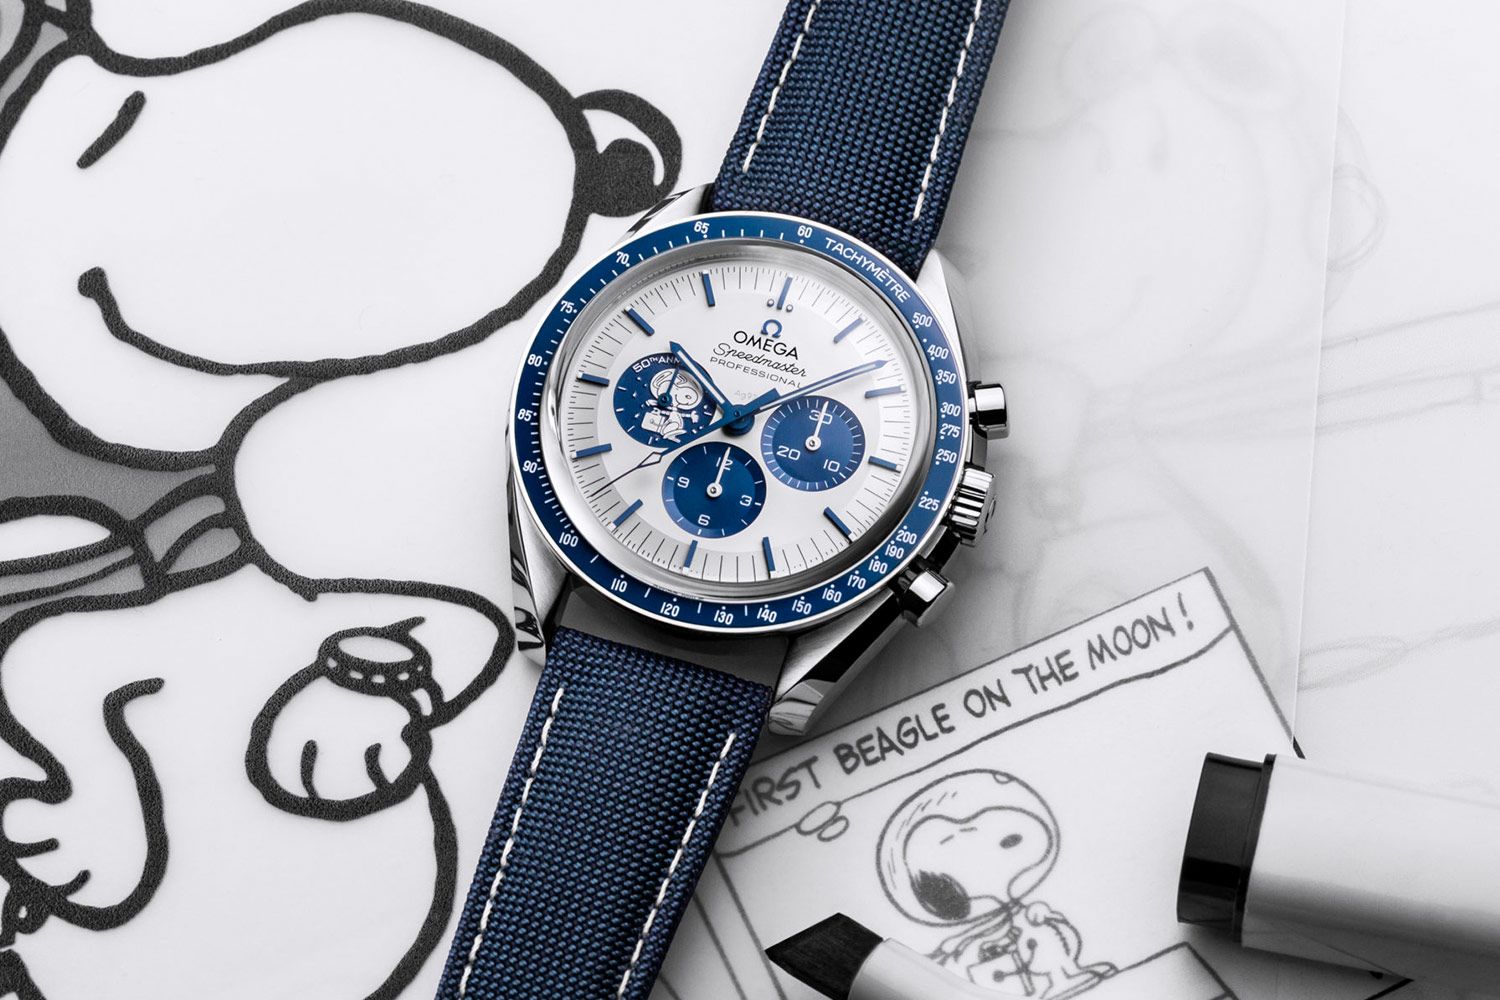 What Does Snoopy Have To Do With Nasa And The Omega Speedmaster